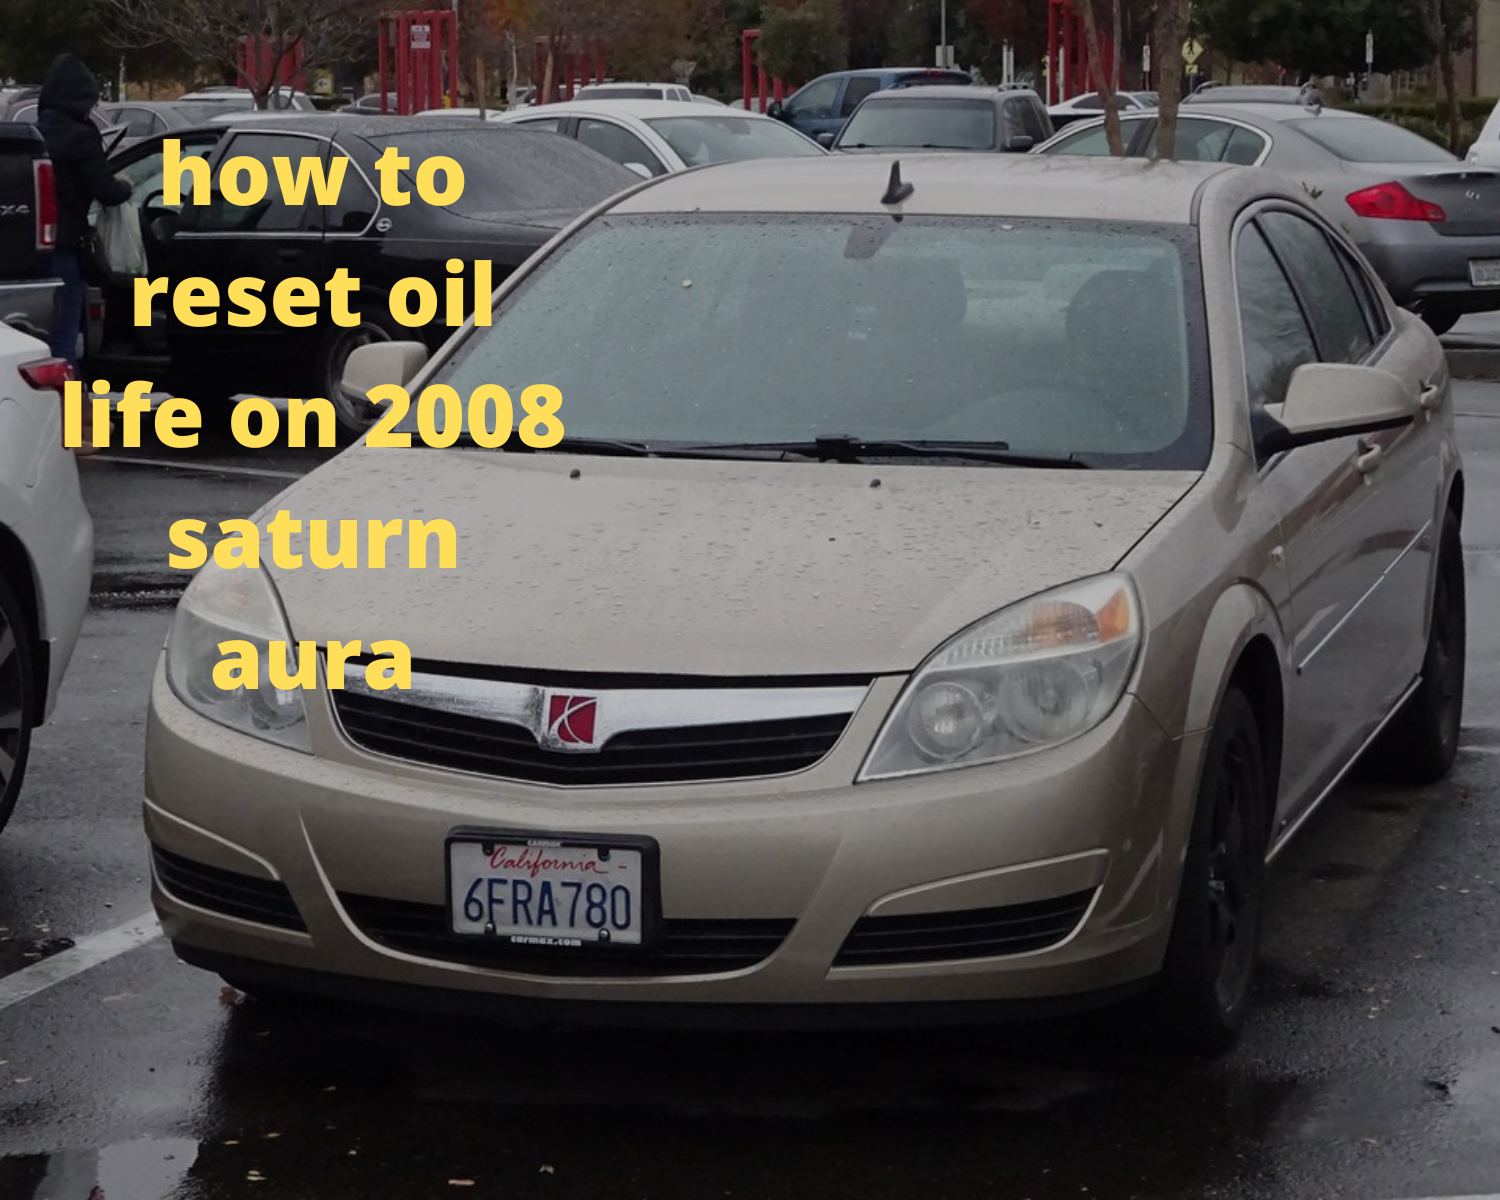 how to reset oil life on 2008 saturn aura